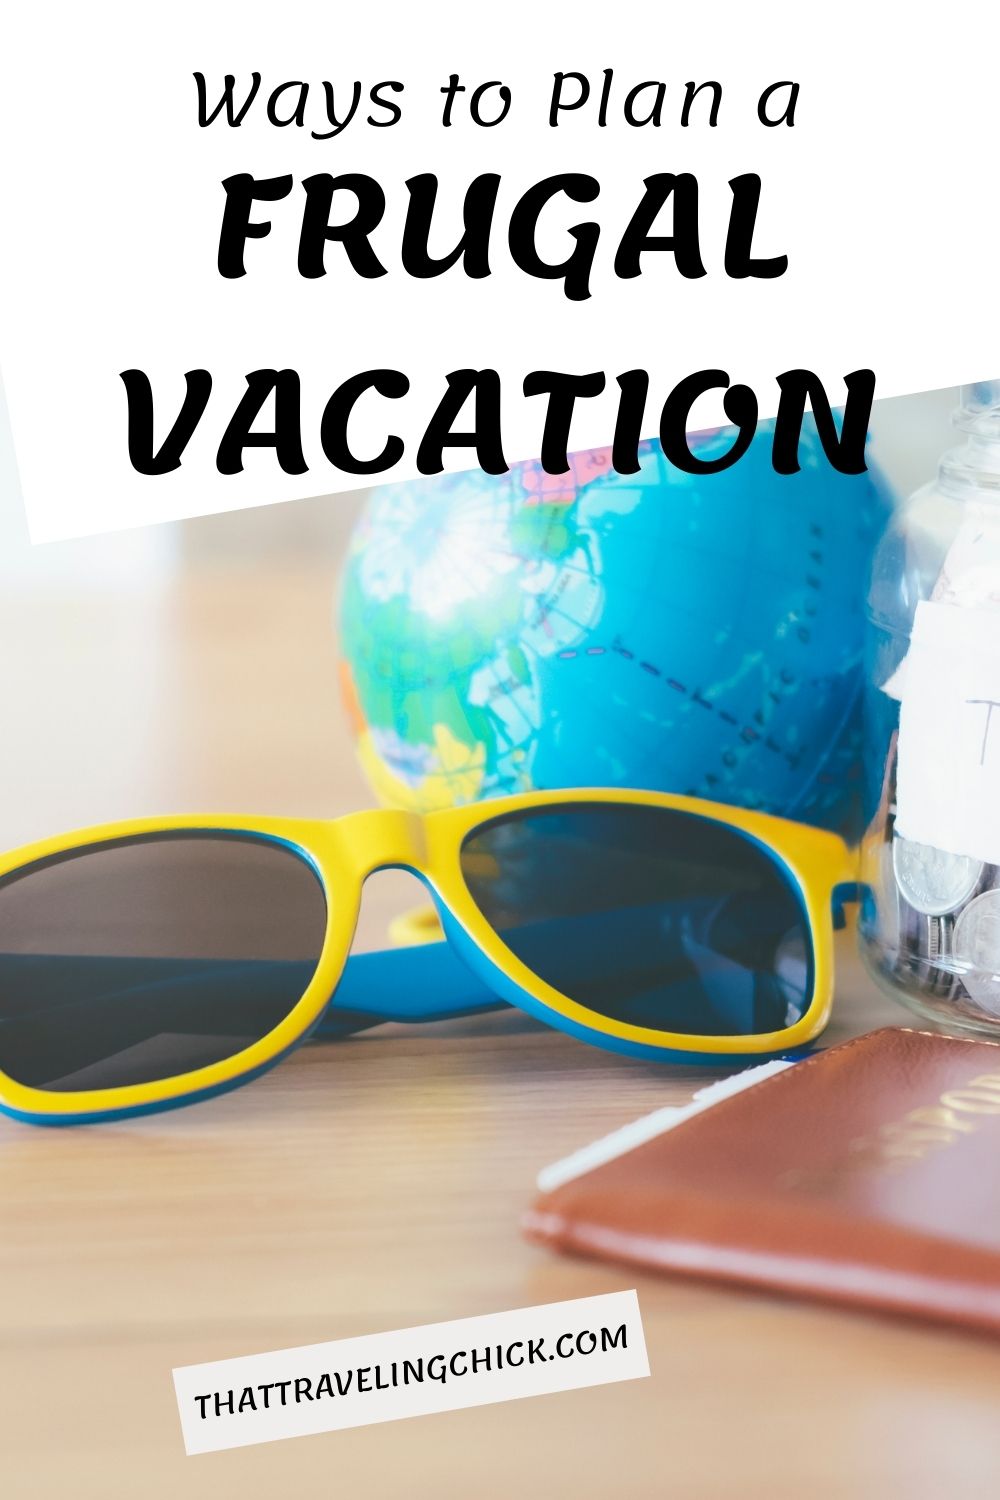 Frugal Vacation #frugalvacation